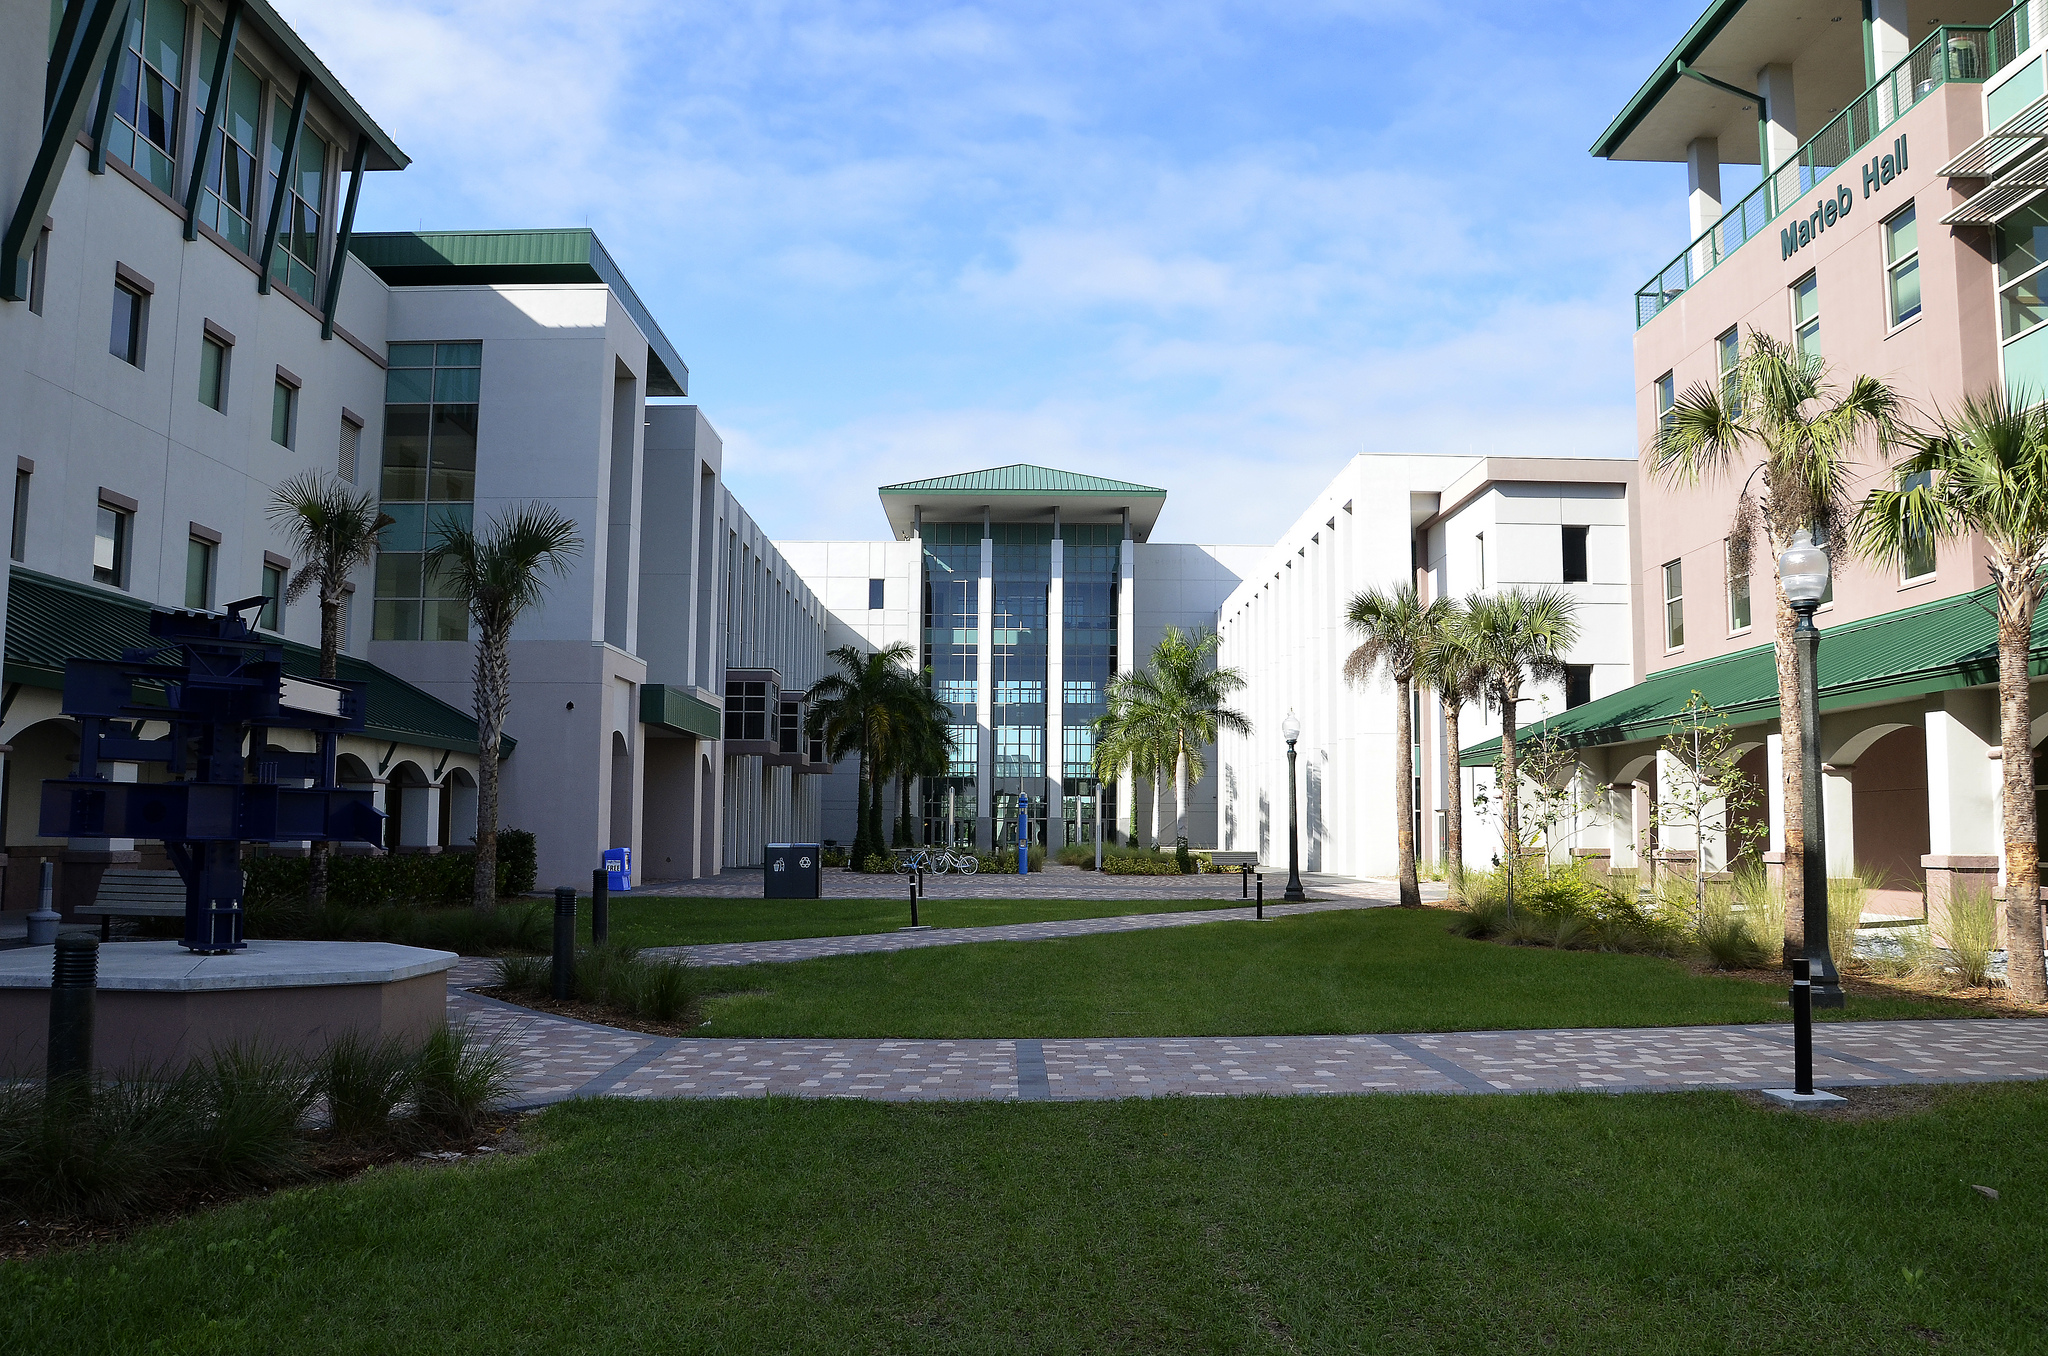 Top 5 Most Desirable College Campuses (Inspired by Florida Gulf Coast University)